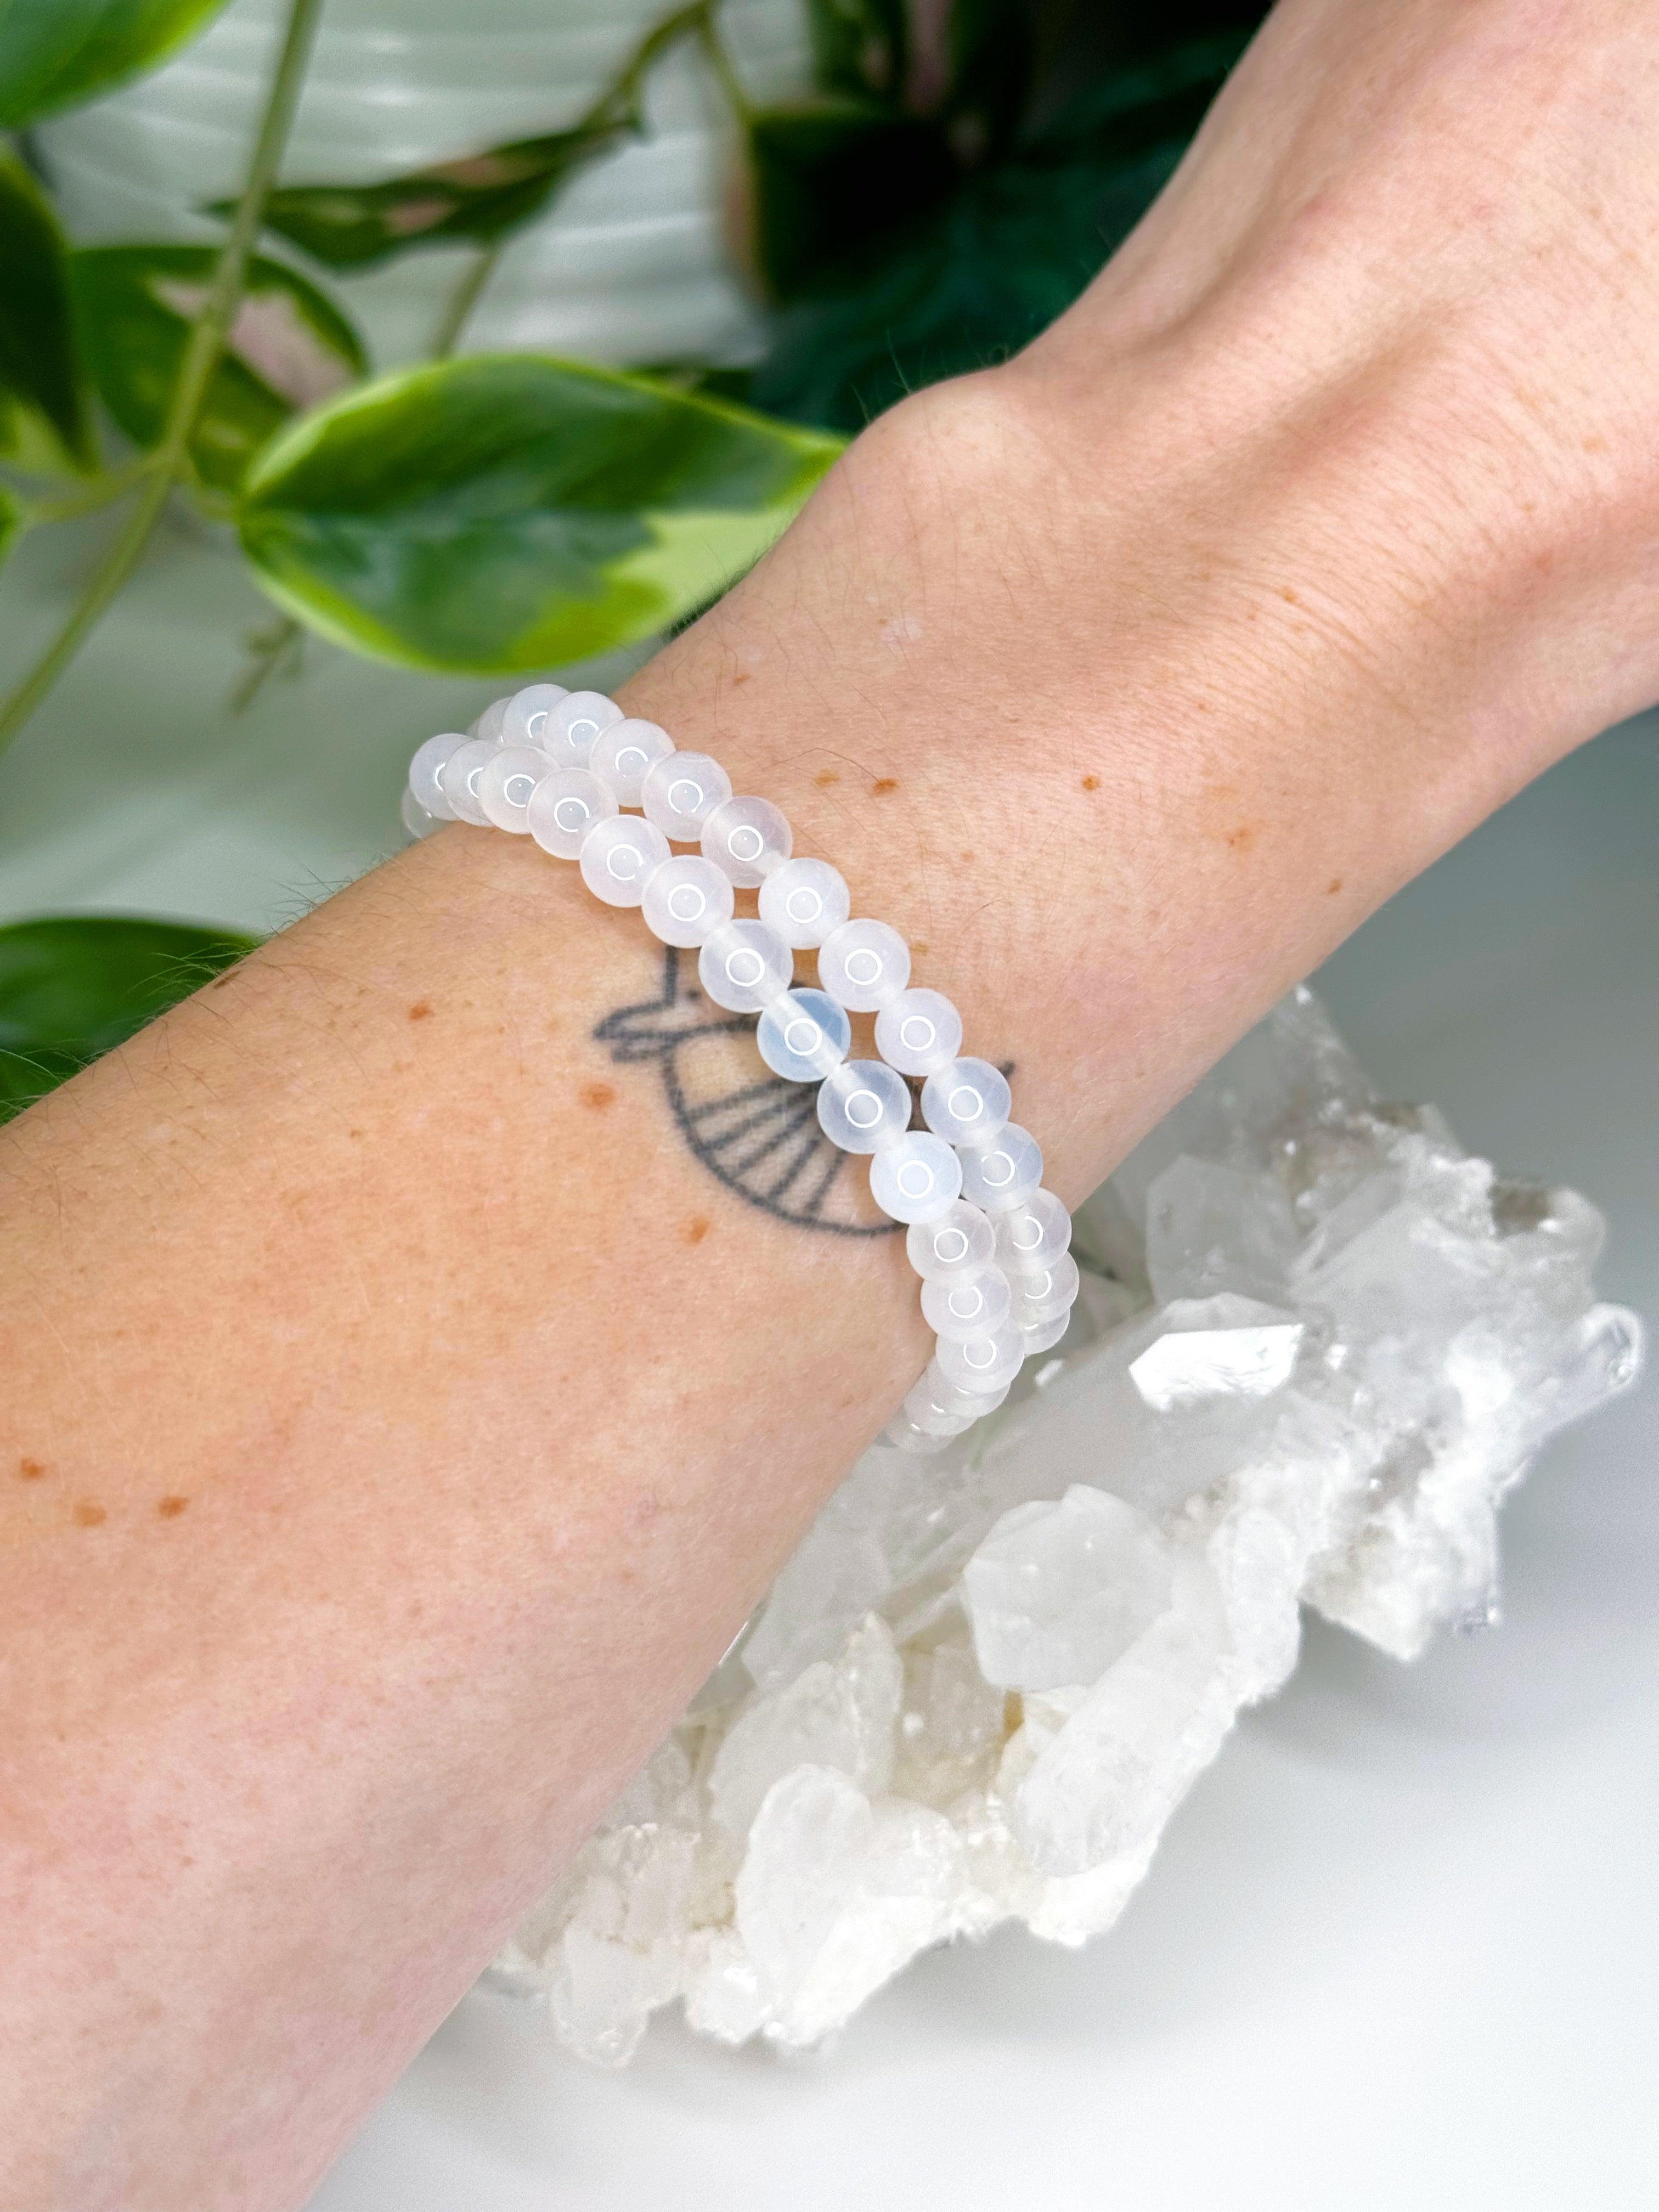 WHITE AGATE 6mm - HANDMADE CRYSTAL BRACELET - 6mm, agate, bracelet, crystal bracelet, emotional support, focus gift bundle, handmade bracelet, jewelry, joy gift bundle, market bracelet, recently added, Wearable, white agate, winter collection, winter solstice collection - The Mineral Maven